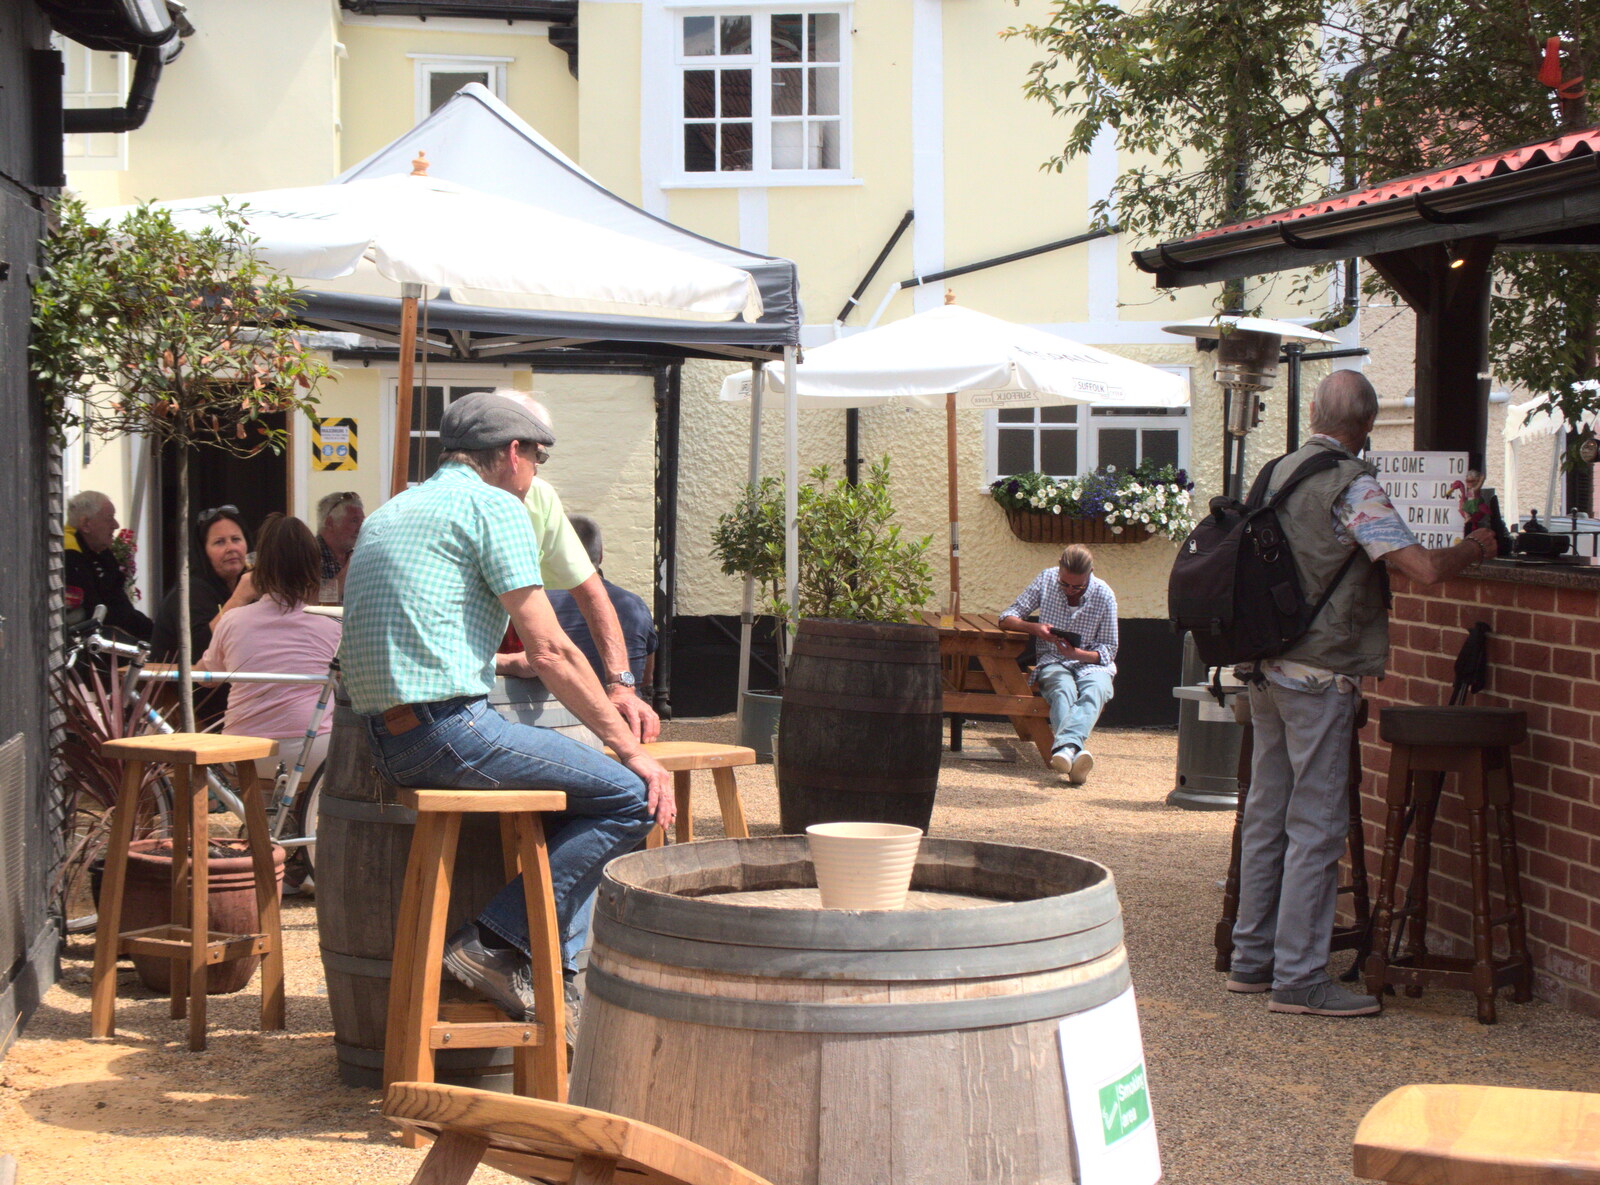 The Queen's Head's beer garden from The BSCC at Redgrave and Station 119, Eye, Suffolk - 17th July 2020